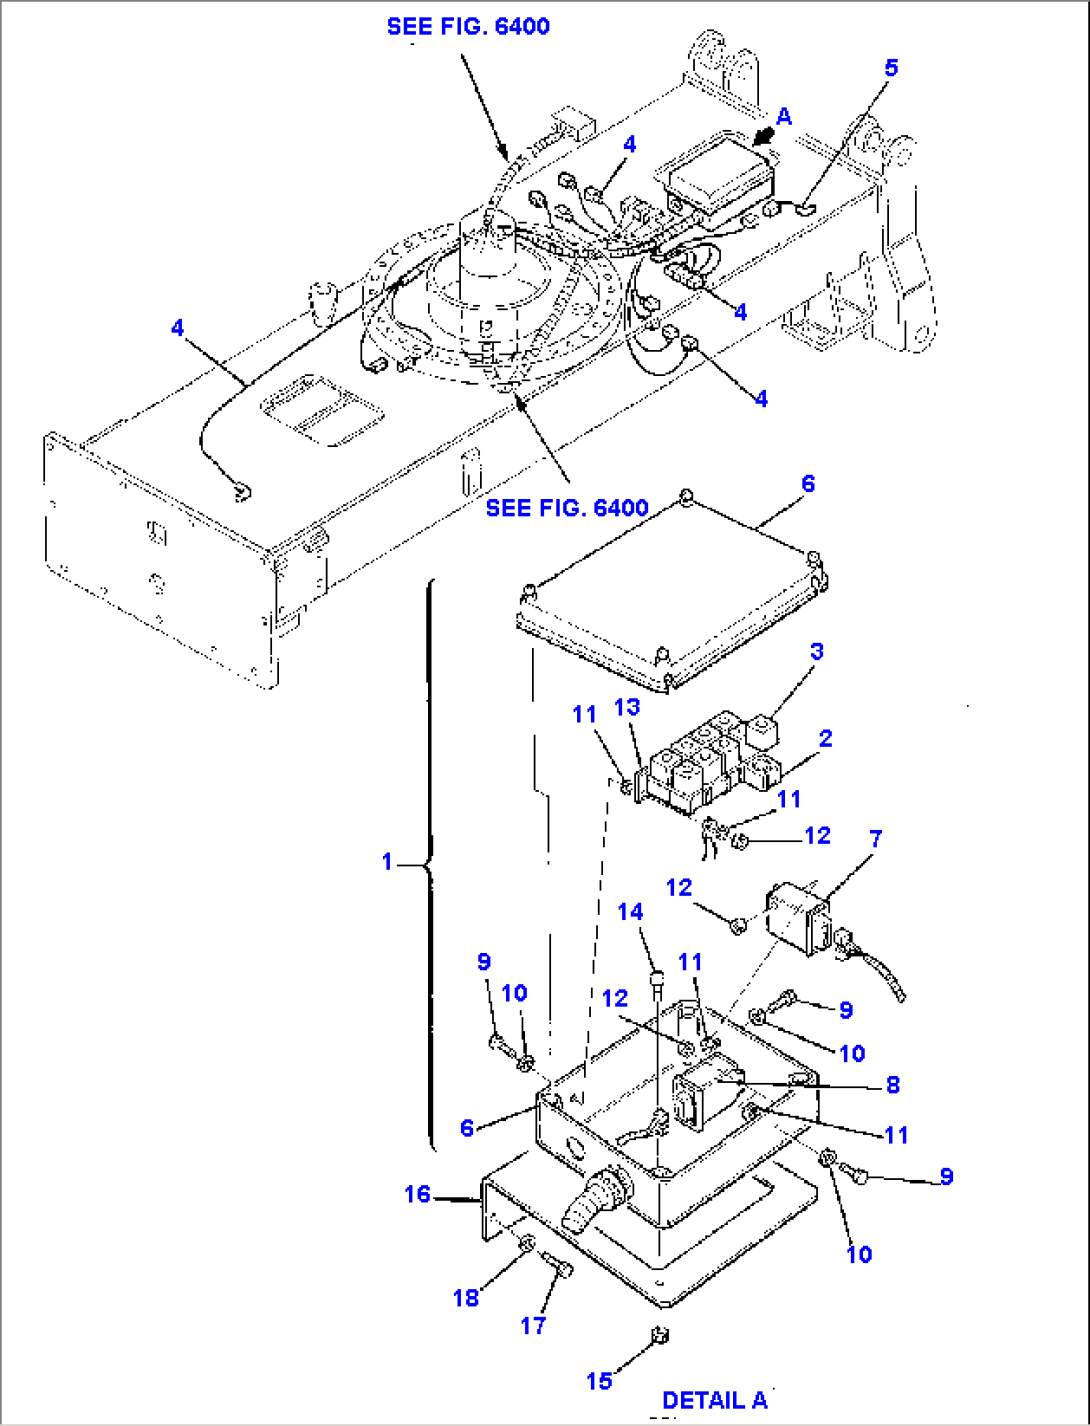 ELECTRICAL SYSTEM (UNDERCARRIAGE LINE)